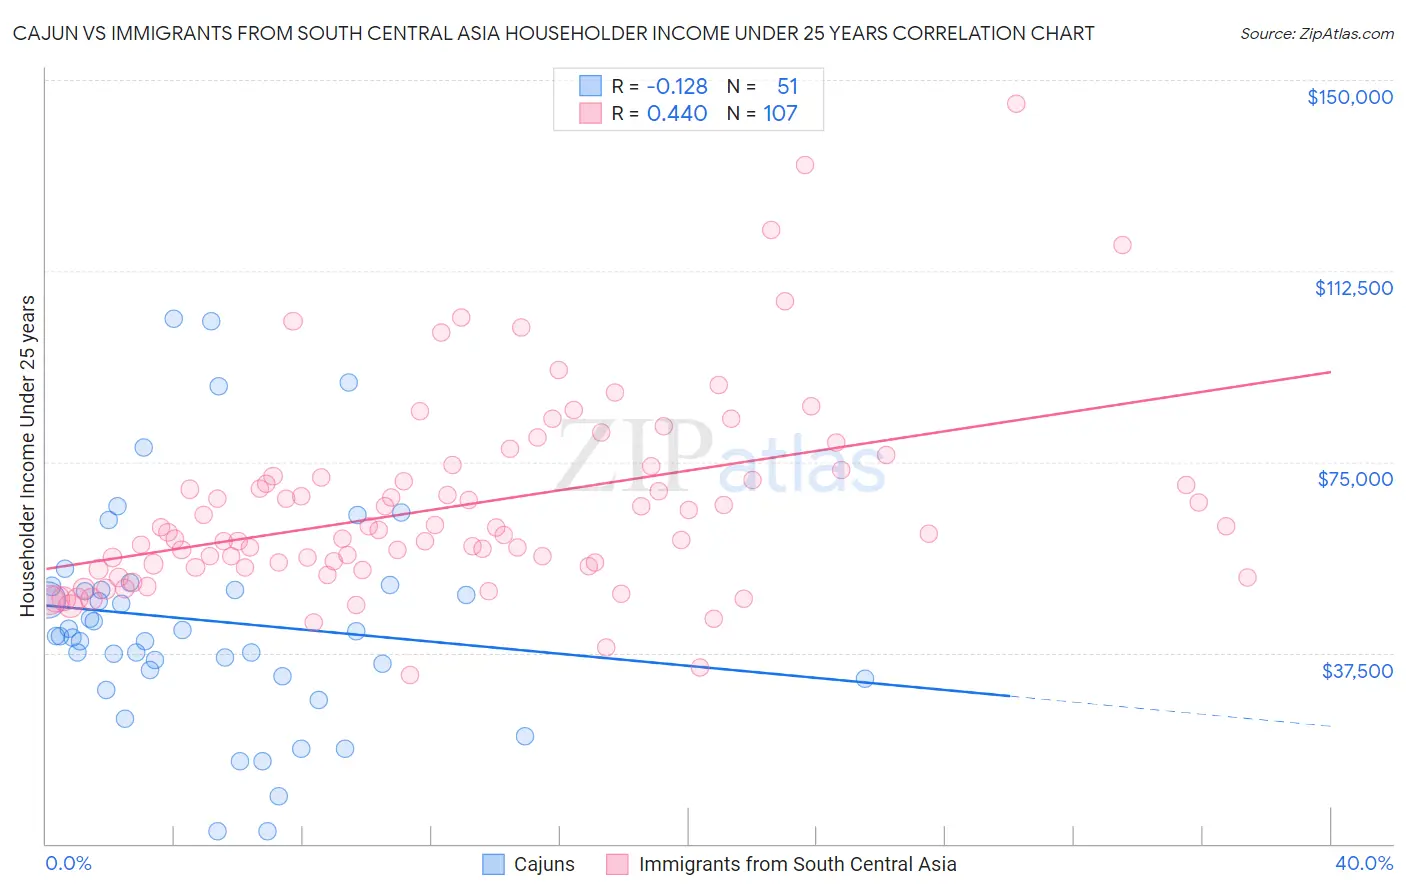 Cajun vs Immigrants from South Central Asia Householder Income Under 25 years